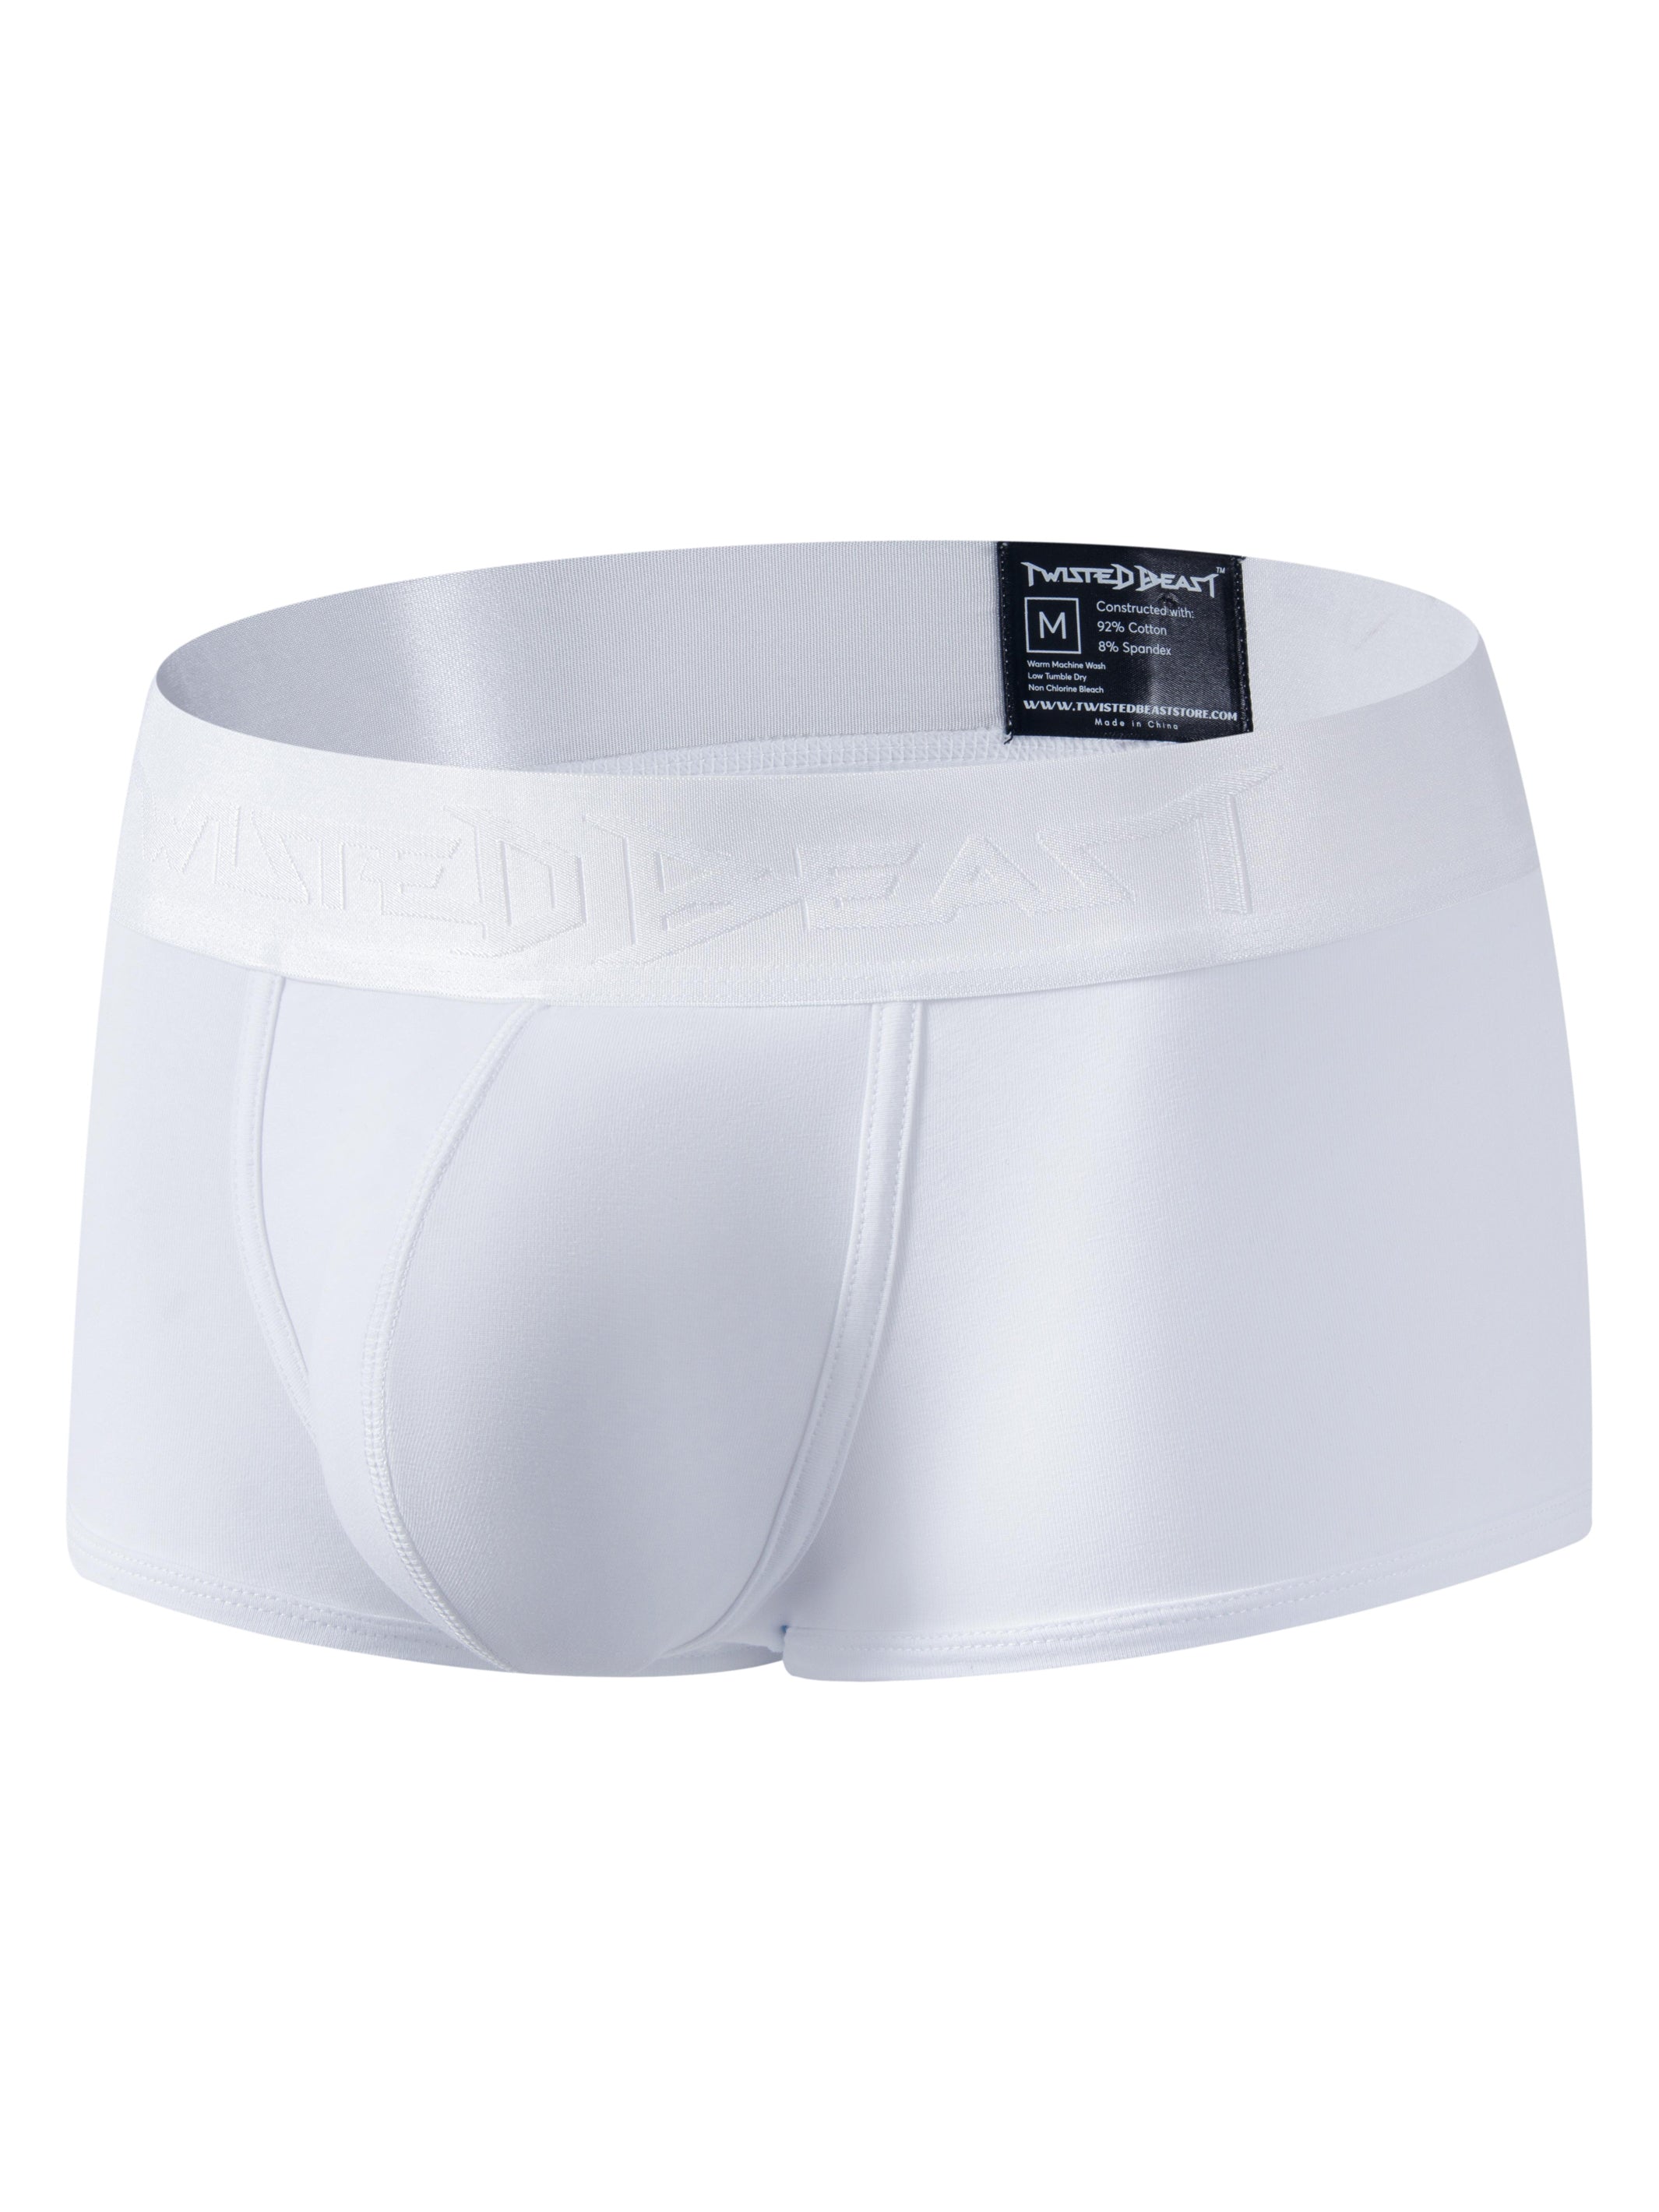 A product photo showing Phantom Boxers in white.